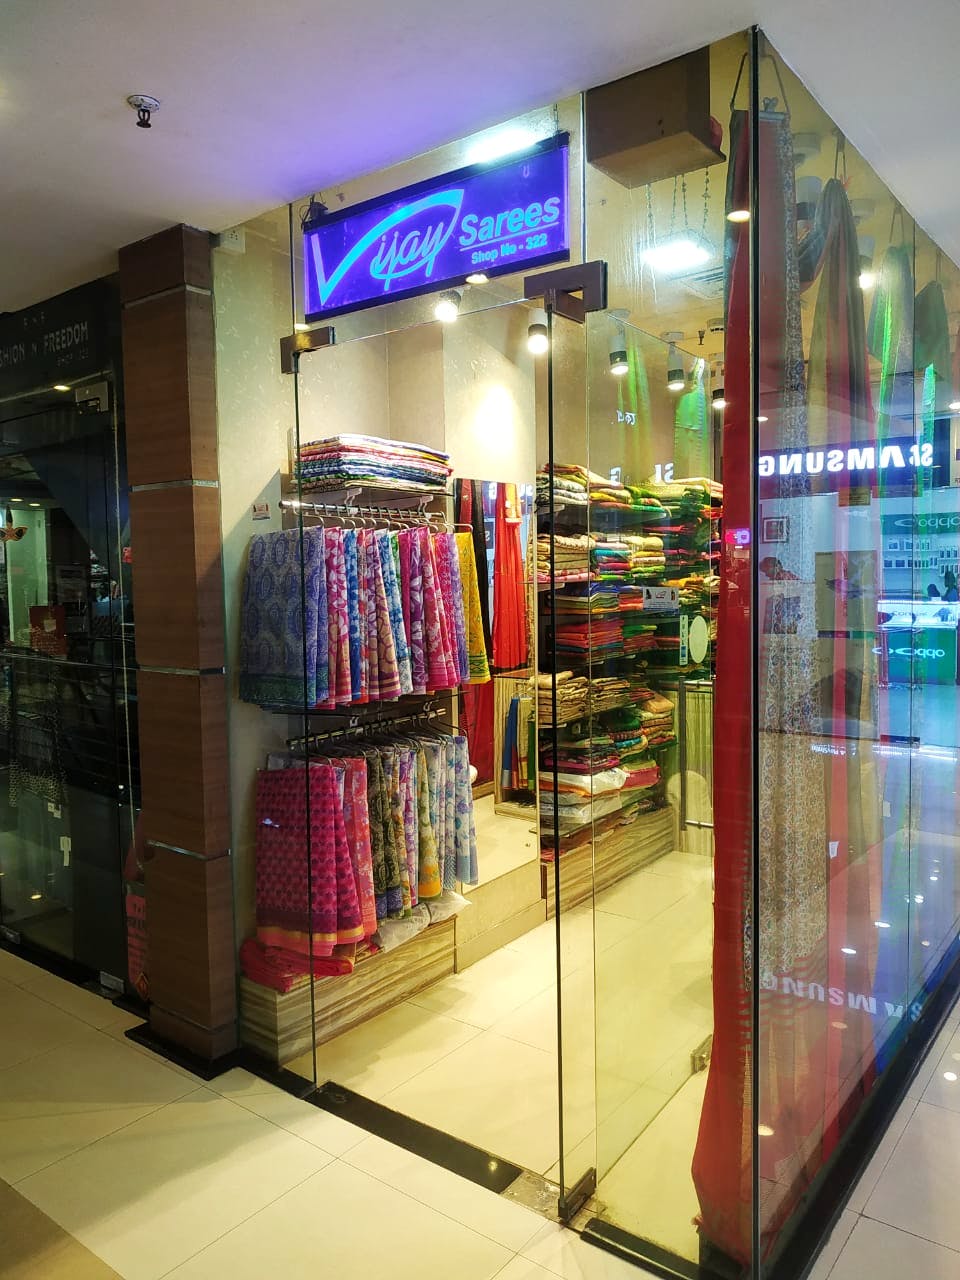 Outlet store,Building,Boutique,Shopping mall,Retail,Display case,Glass,Display window,Interior design